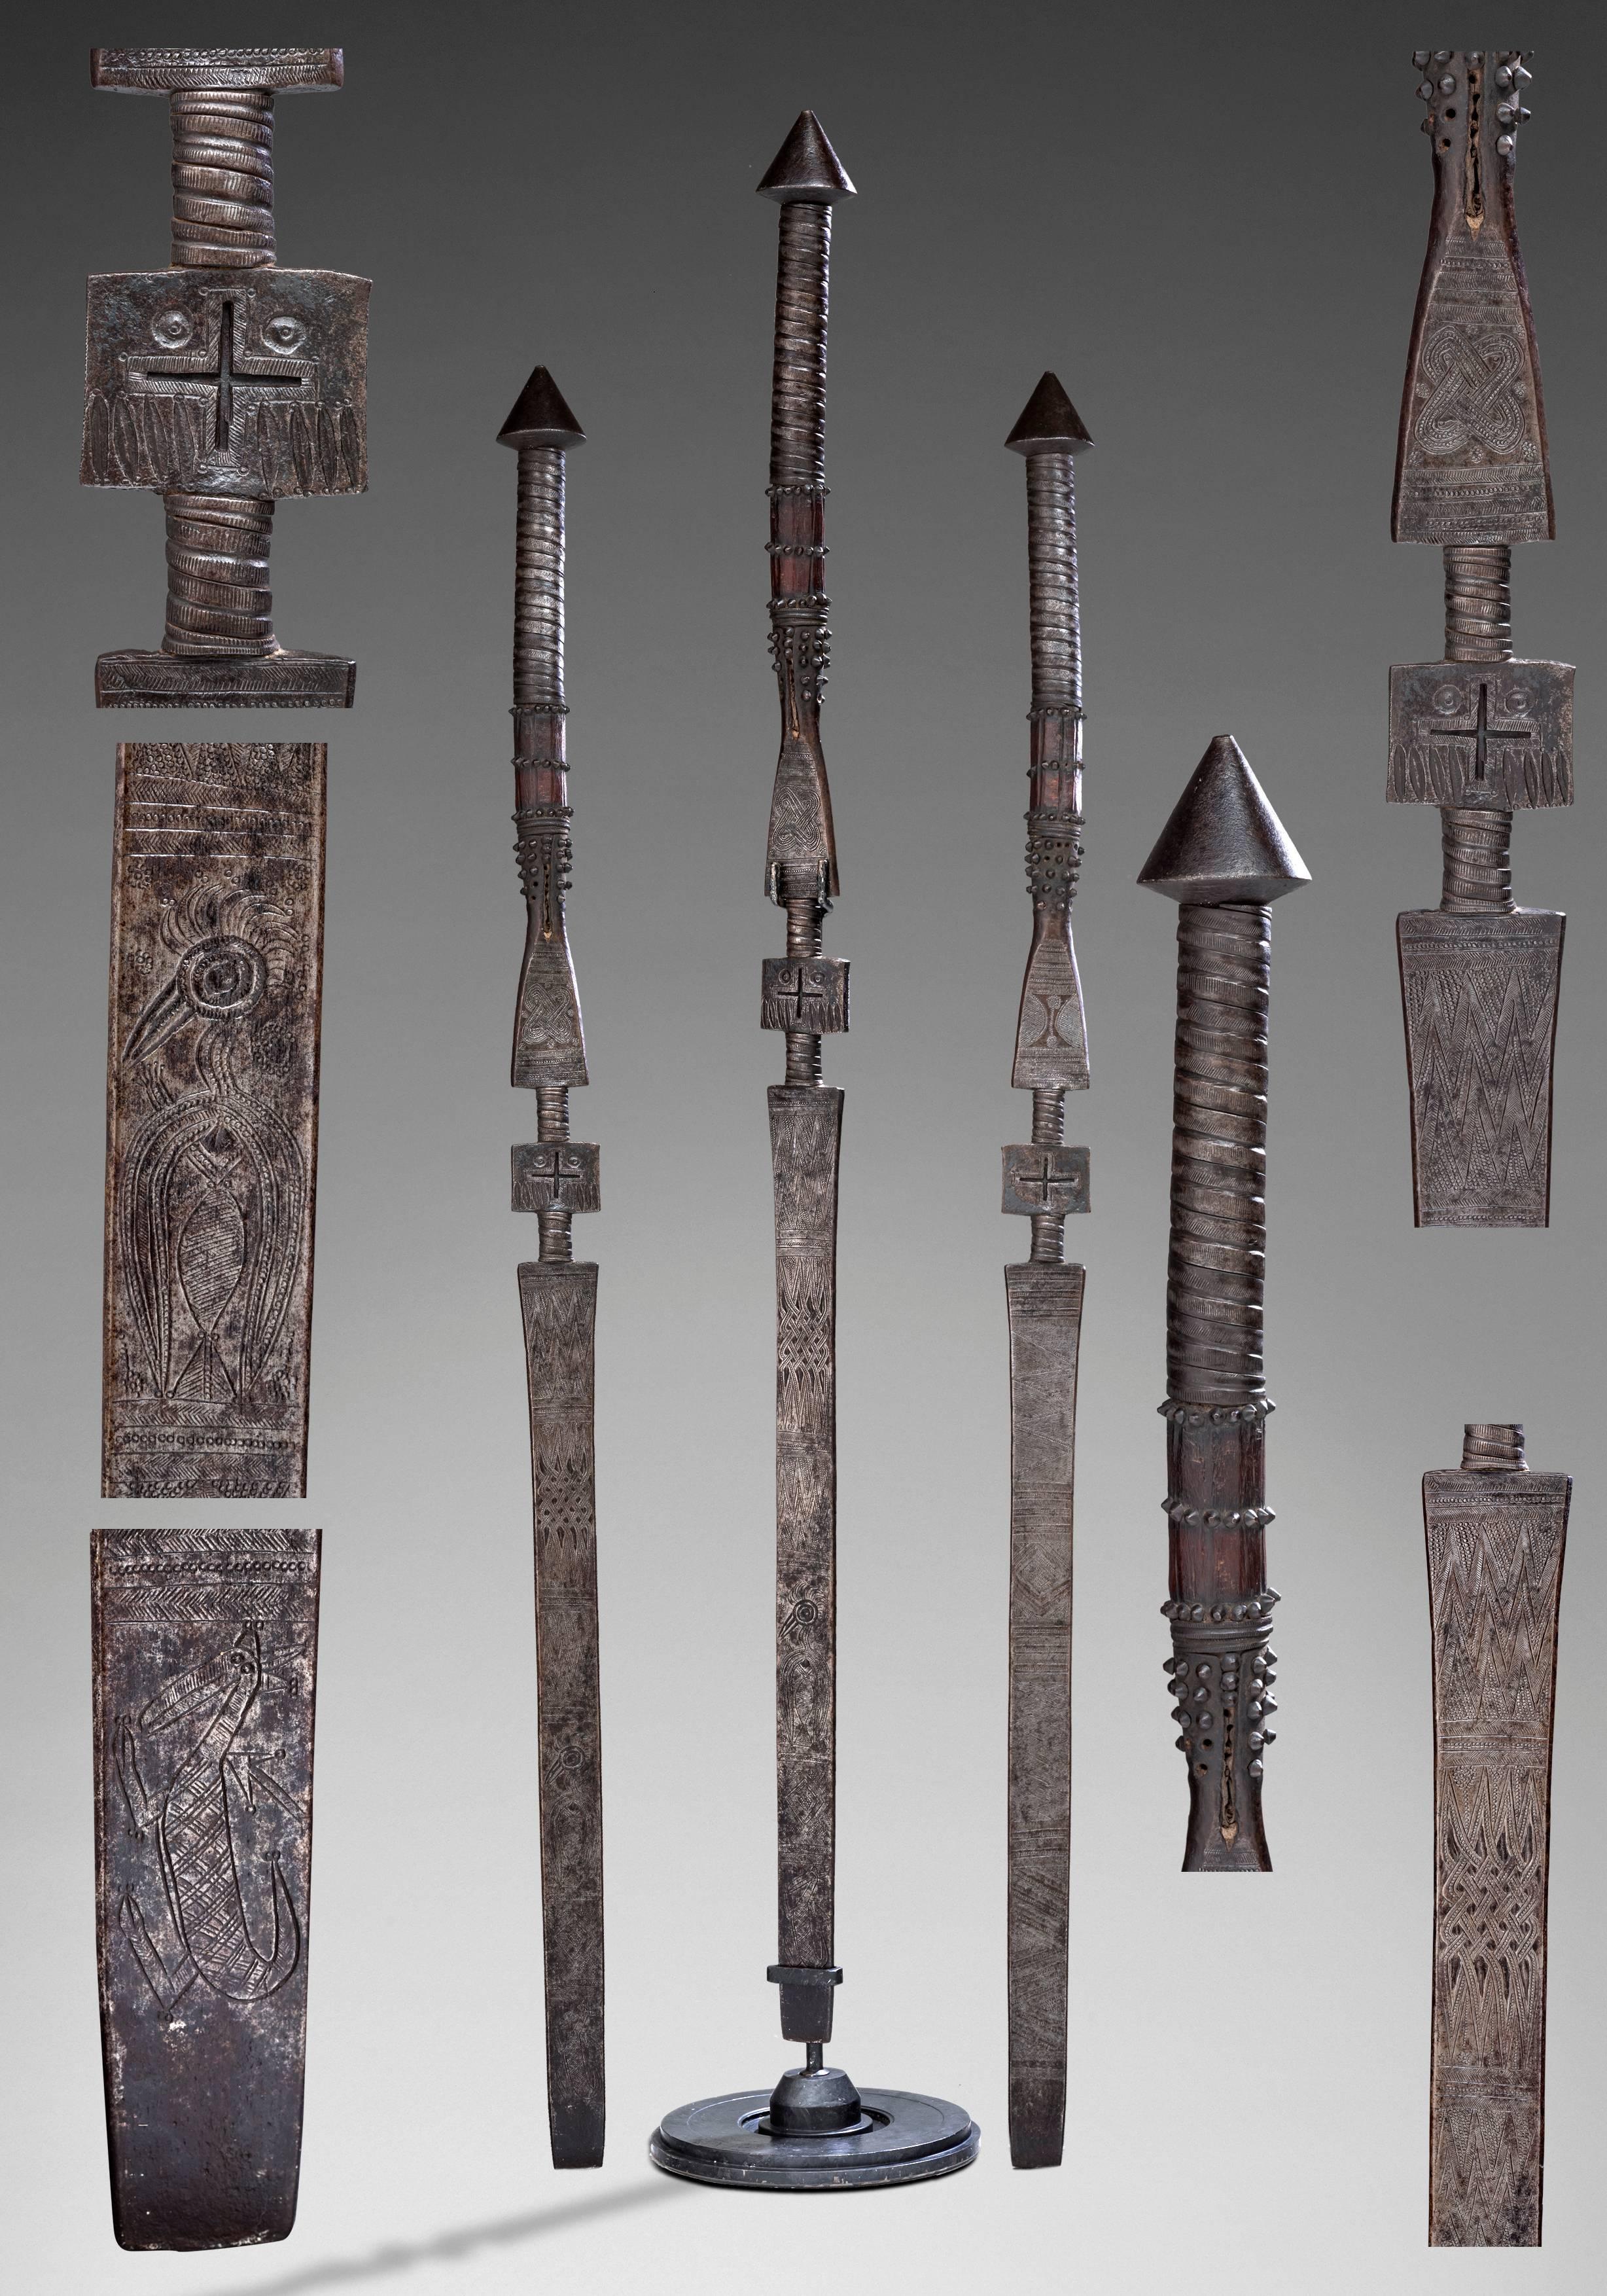 Cult saber, Yoruba symbol 
circa 1860
Nigeria 

Wrought iron with delicate sculptures

A similar sword is in a French Museum in Paris, Musée du Quai Branly
It's a donation from Barbier-Muller of Geneva

Measure: 63